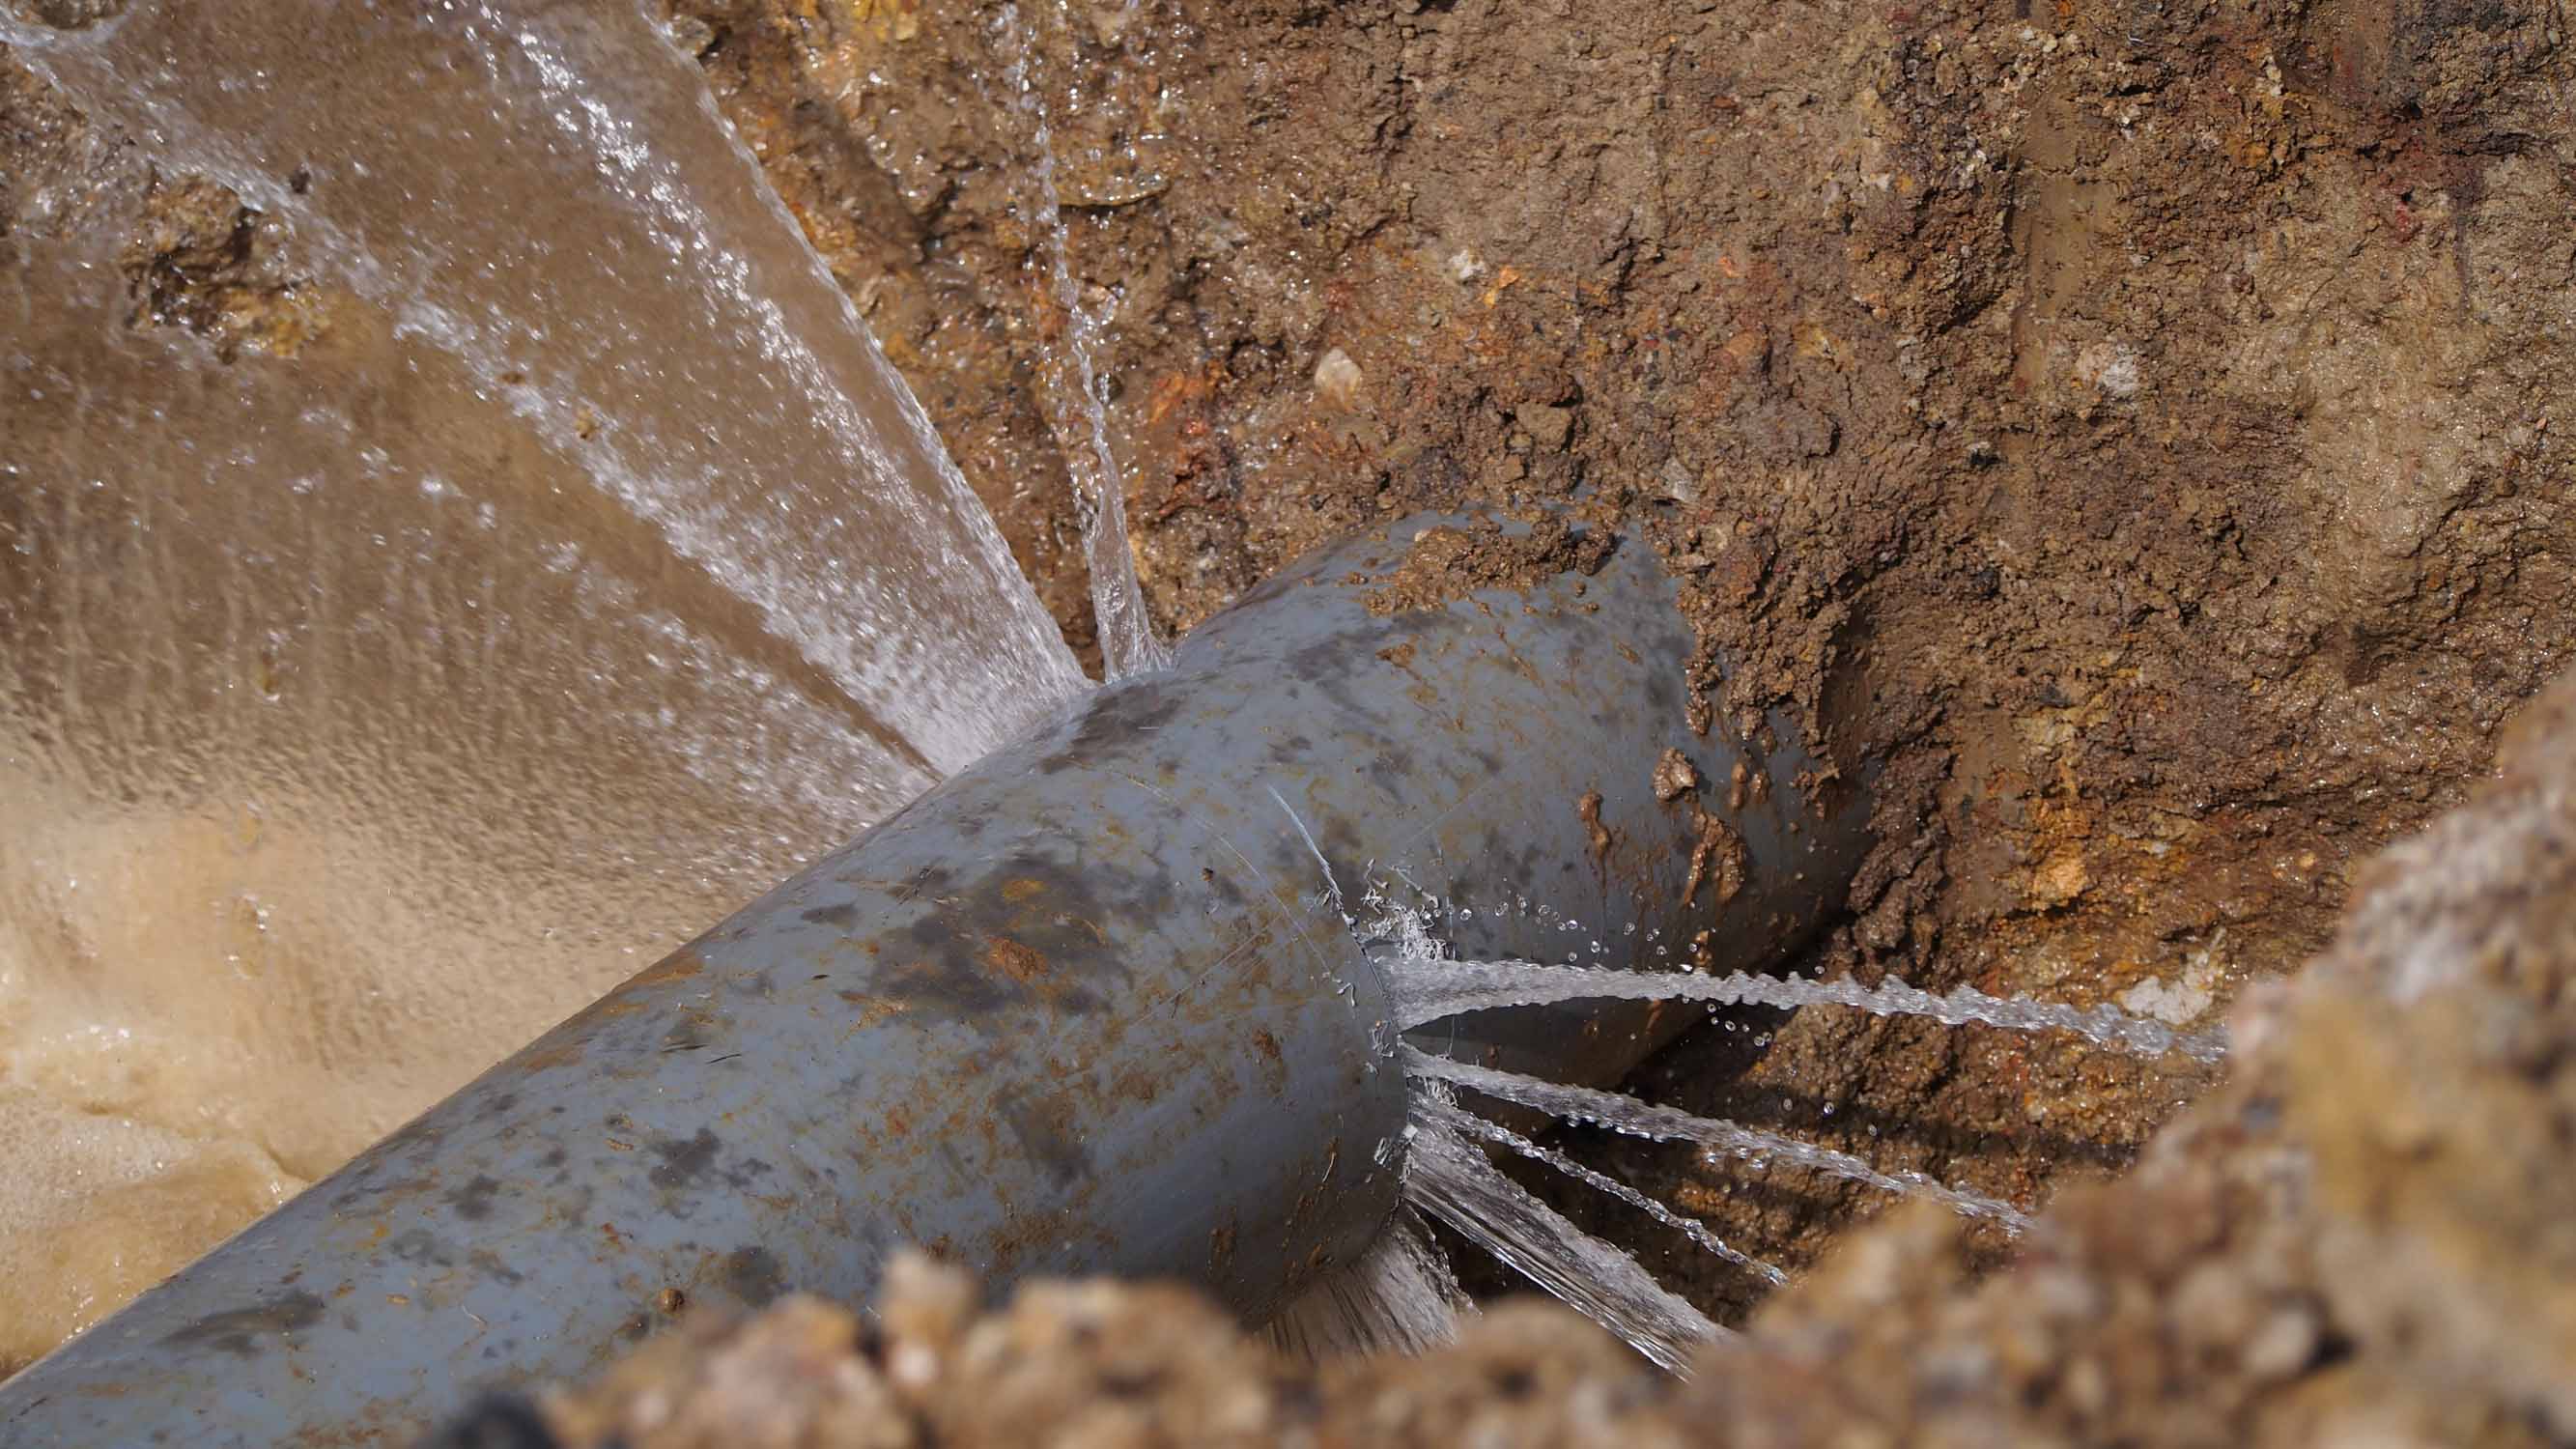 A leaking pipe - contact WyattWorks today to discuss installing moen flow for leak protection.